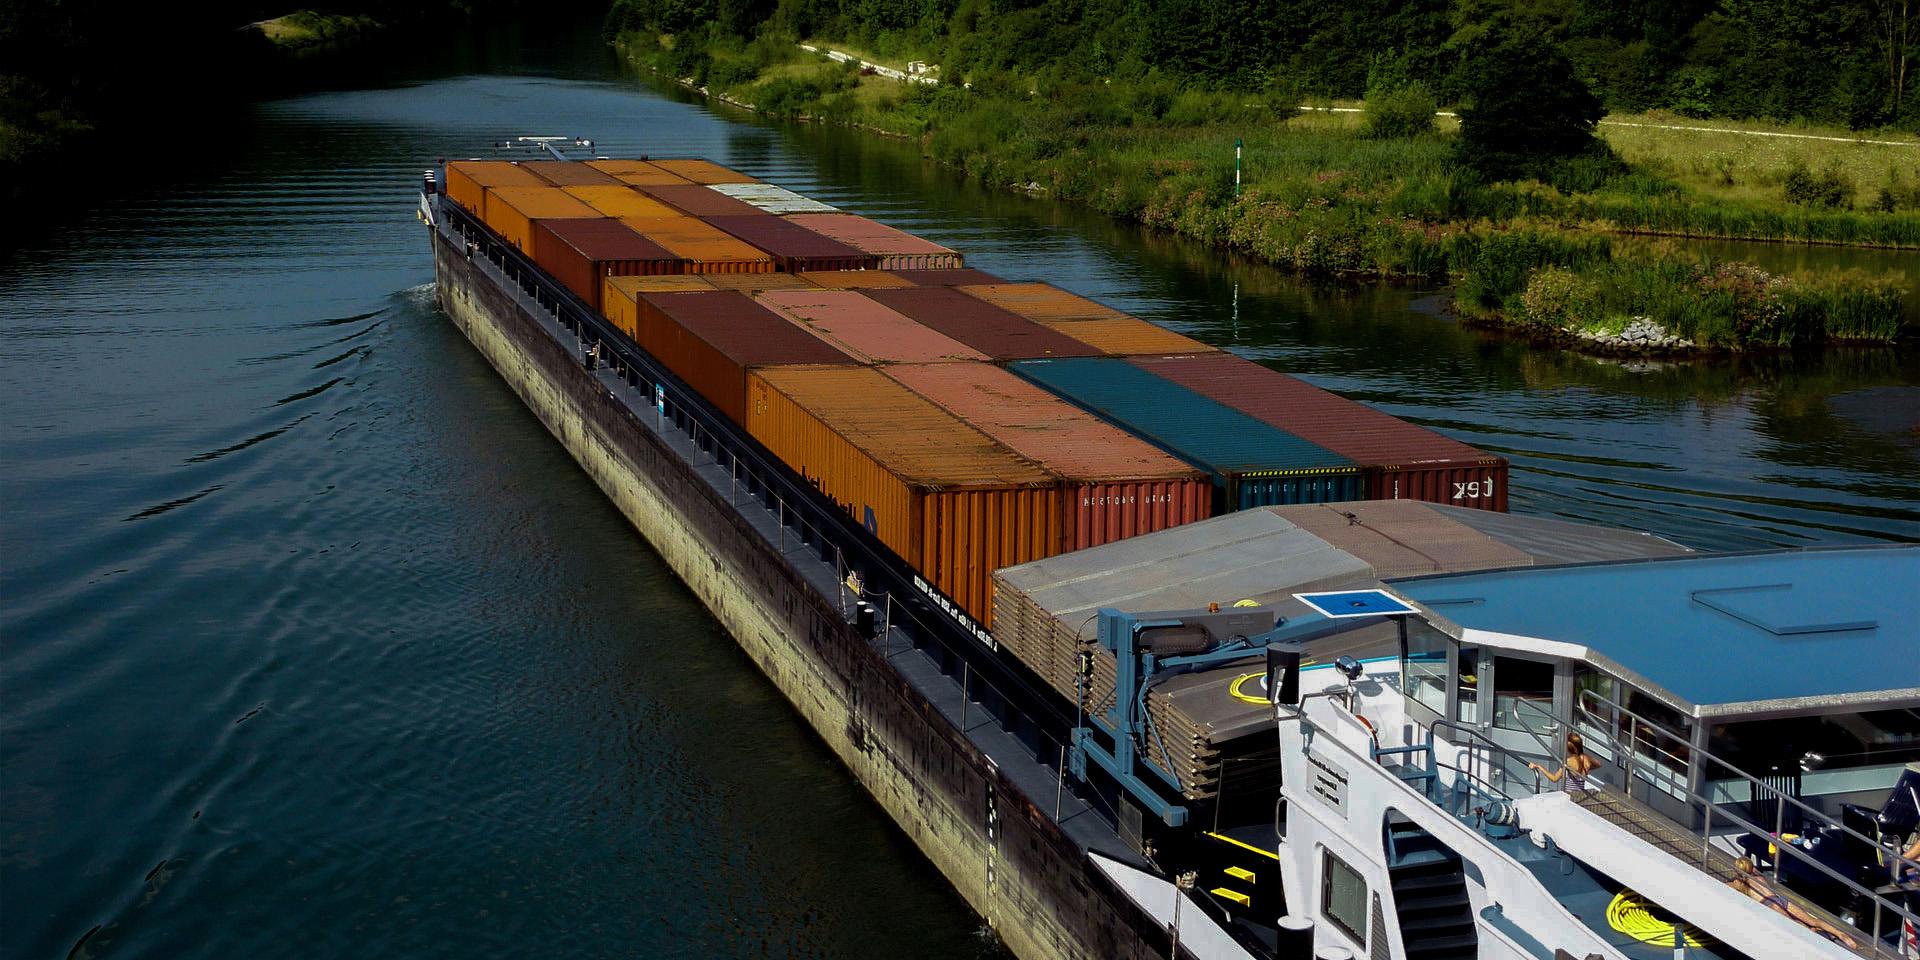 Germany’s waterways are important international transport routes. Source: Fotolia/Michael Rogner